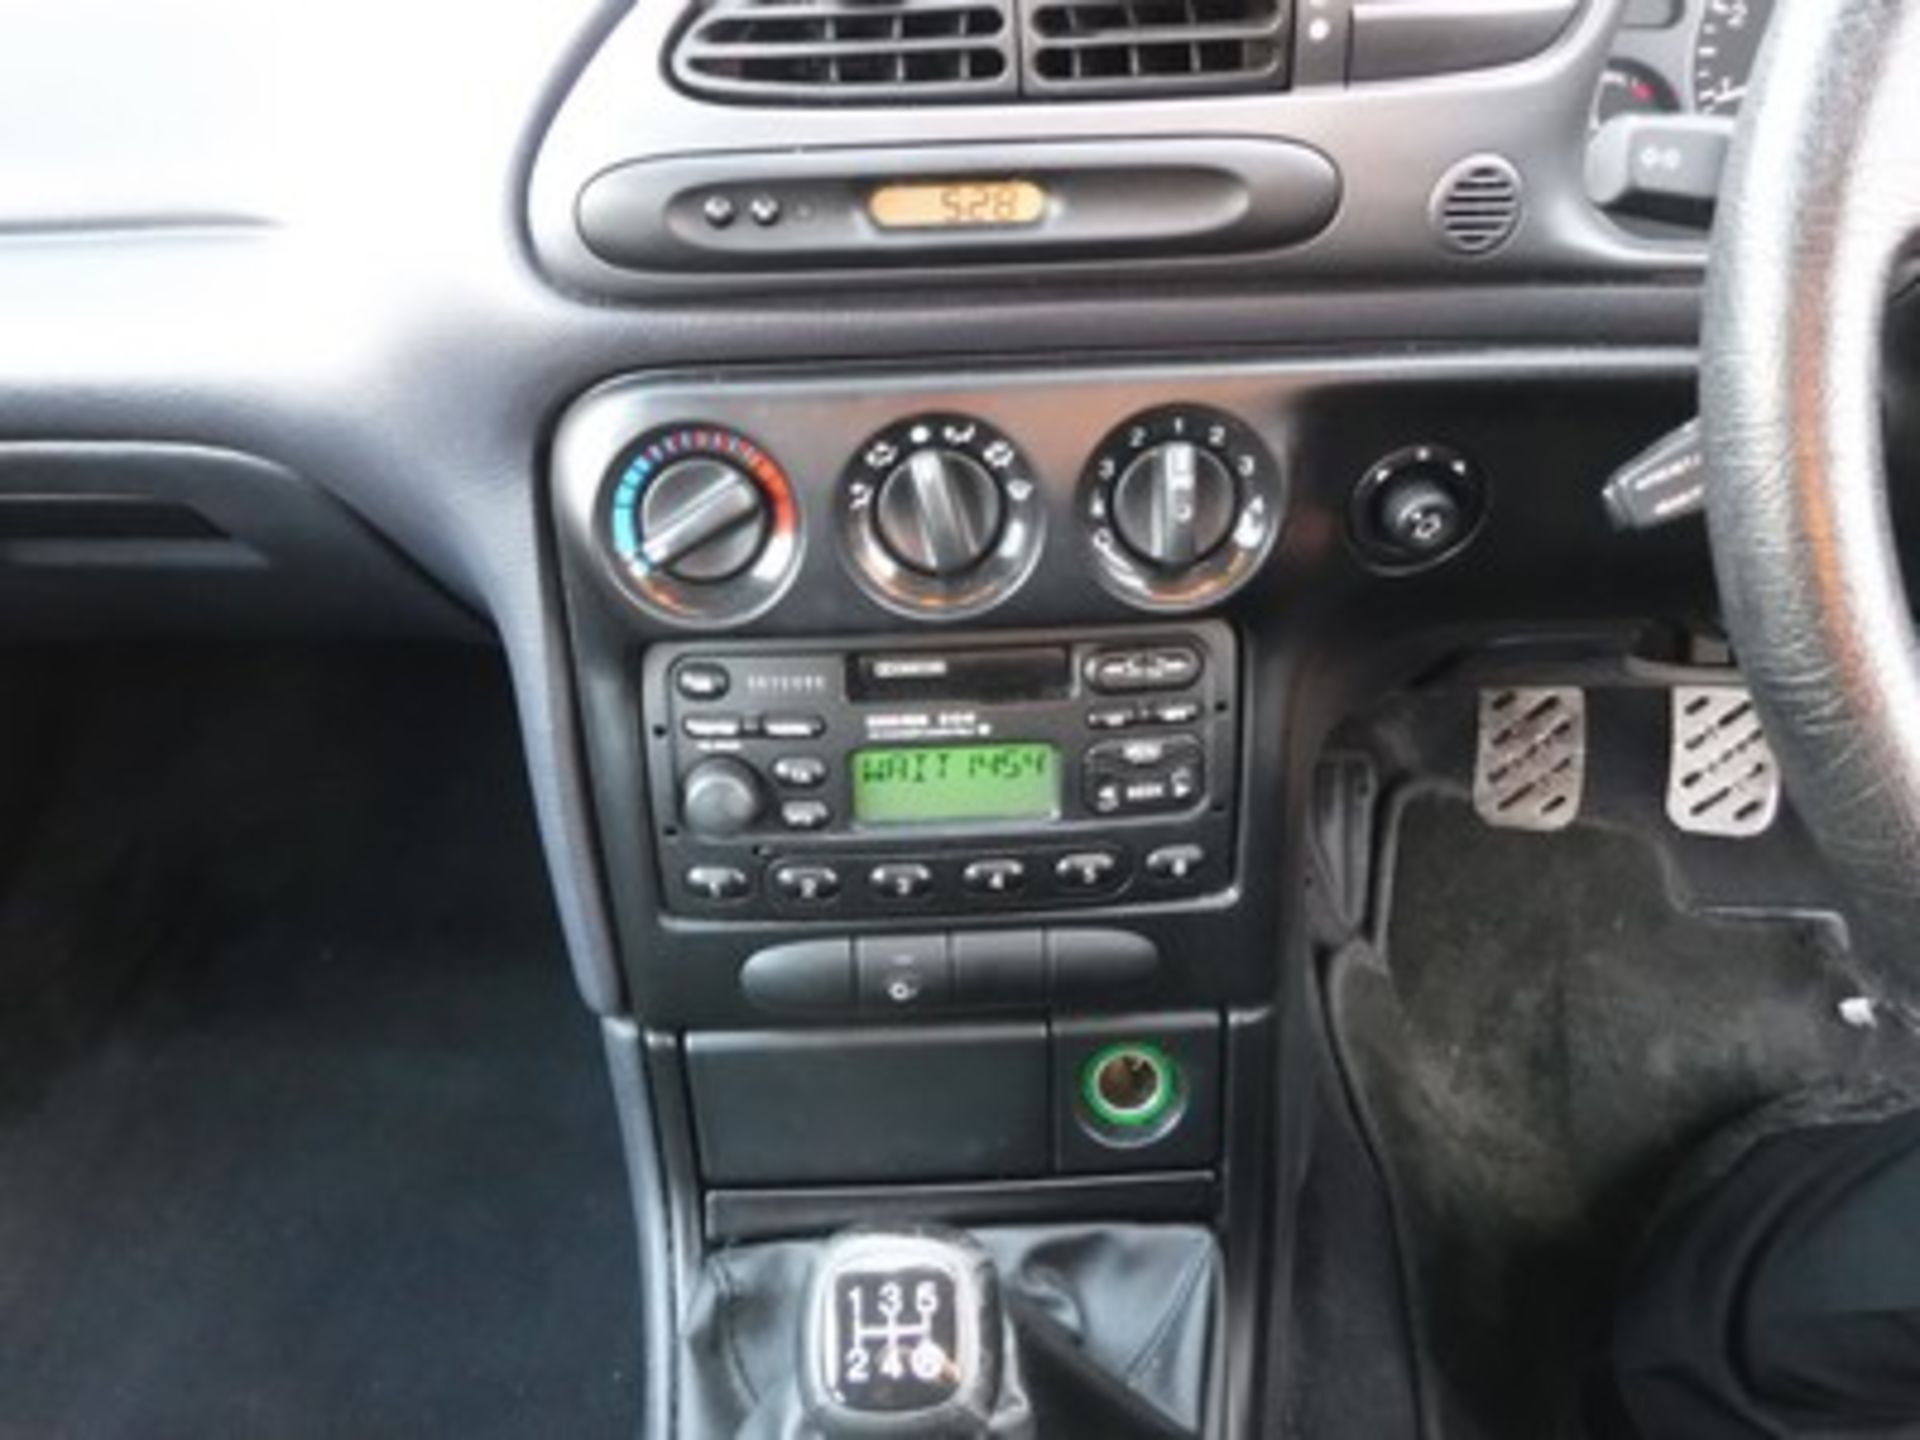 FORD MONDEO ST 24 V6 - 2497cc - Image 24 of 24